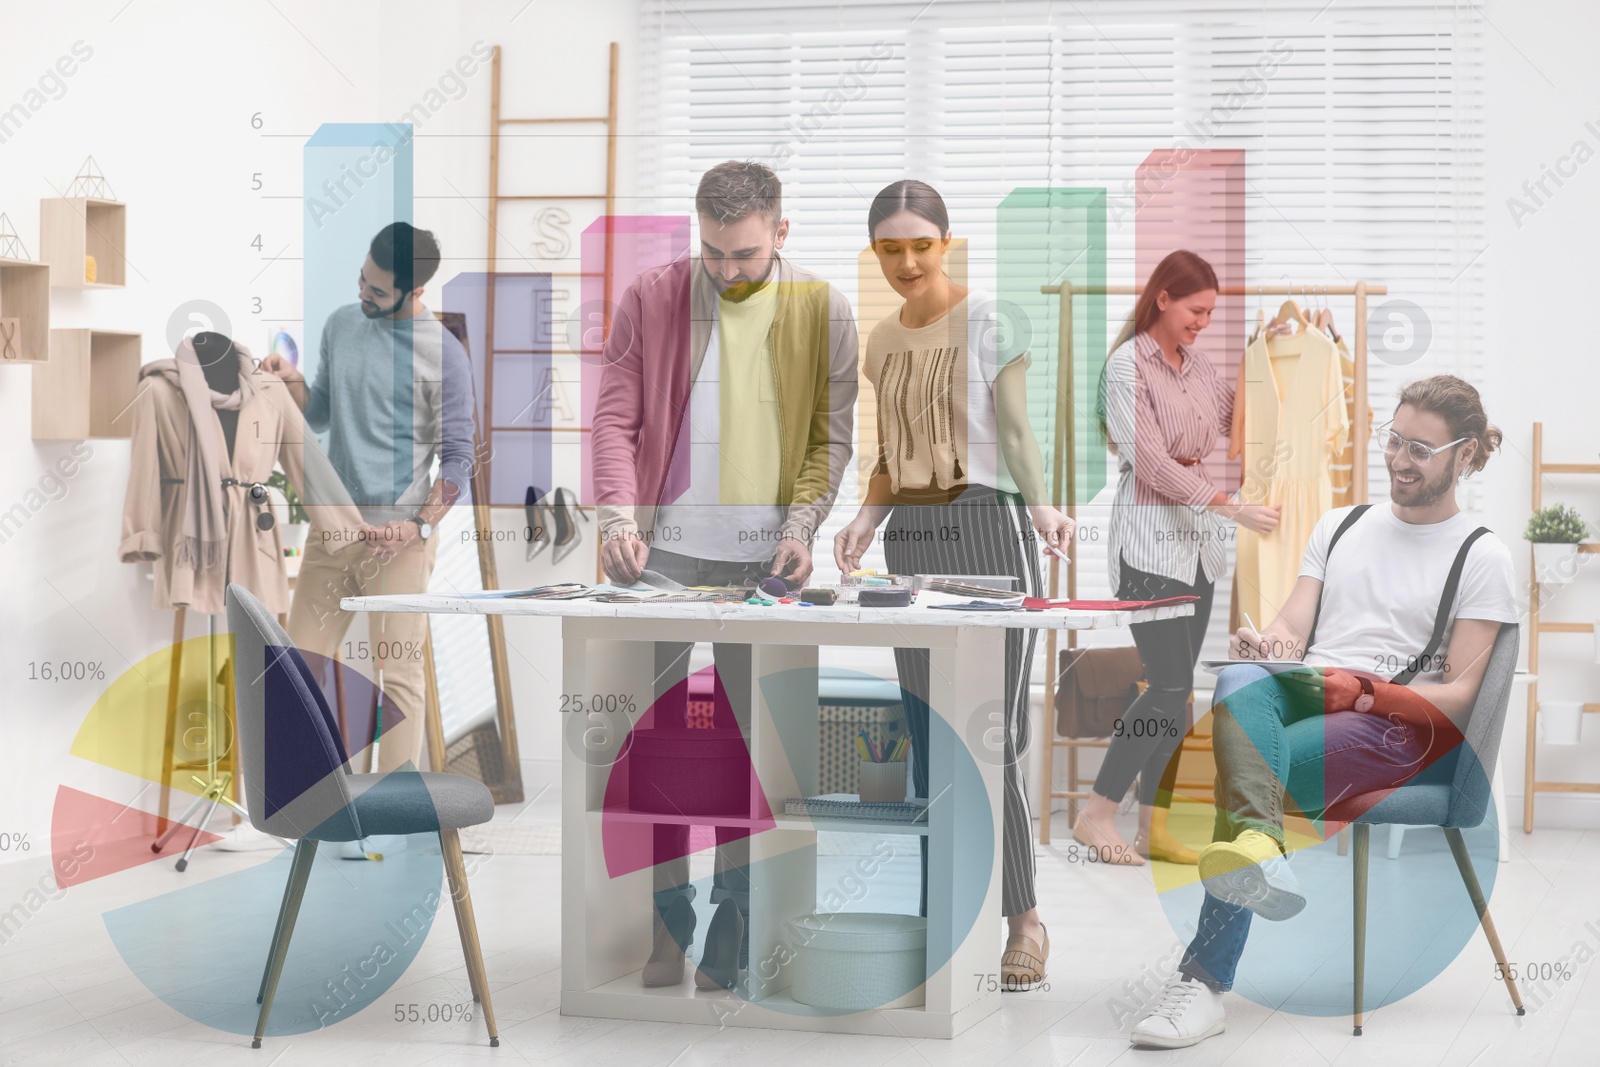 Image of Fashion designers creating new clothes in studio and illustration of colorful graphs. Double exposure